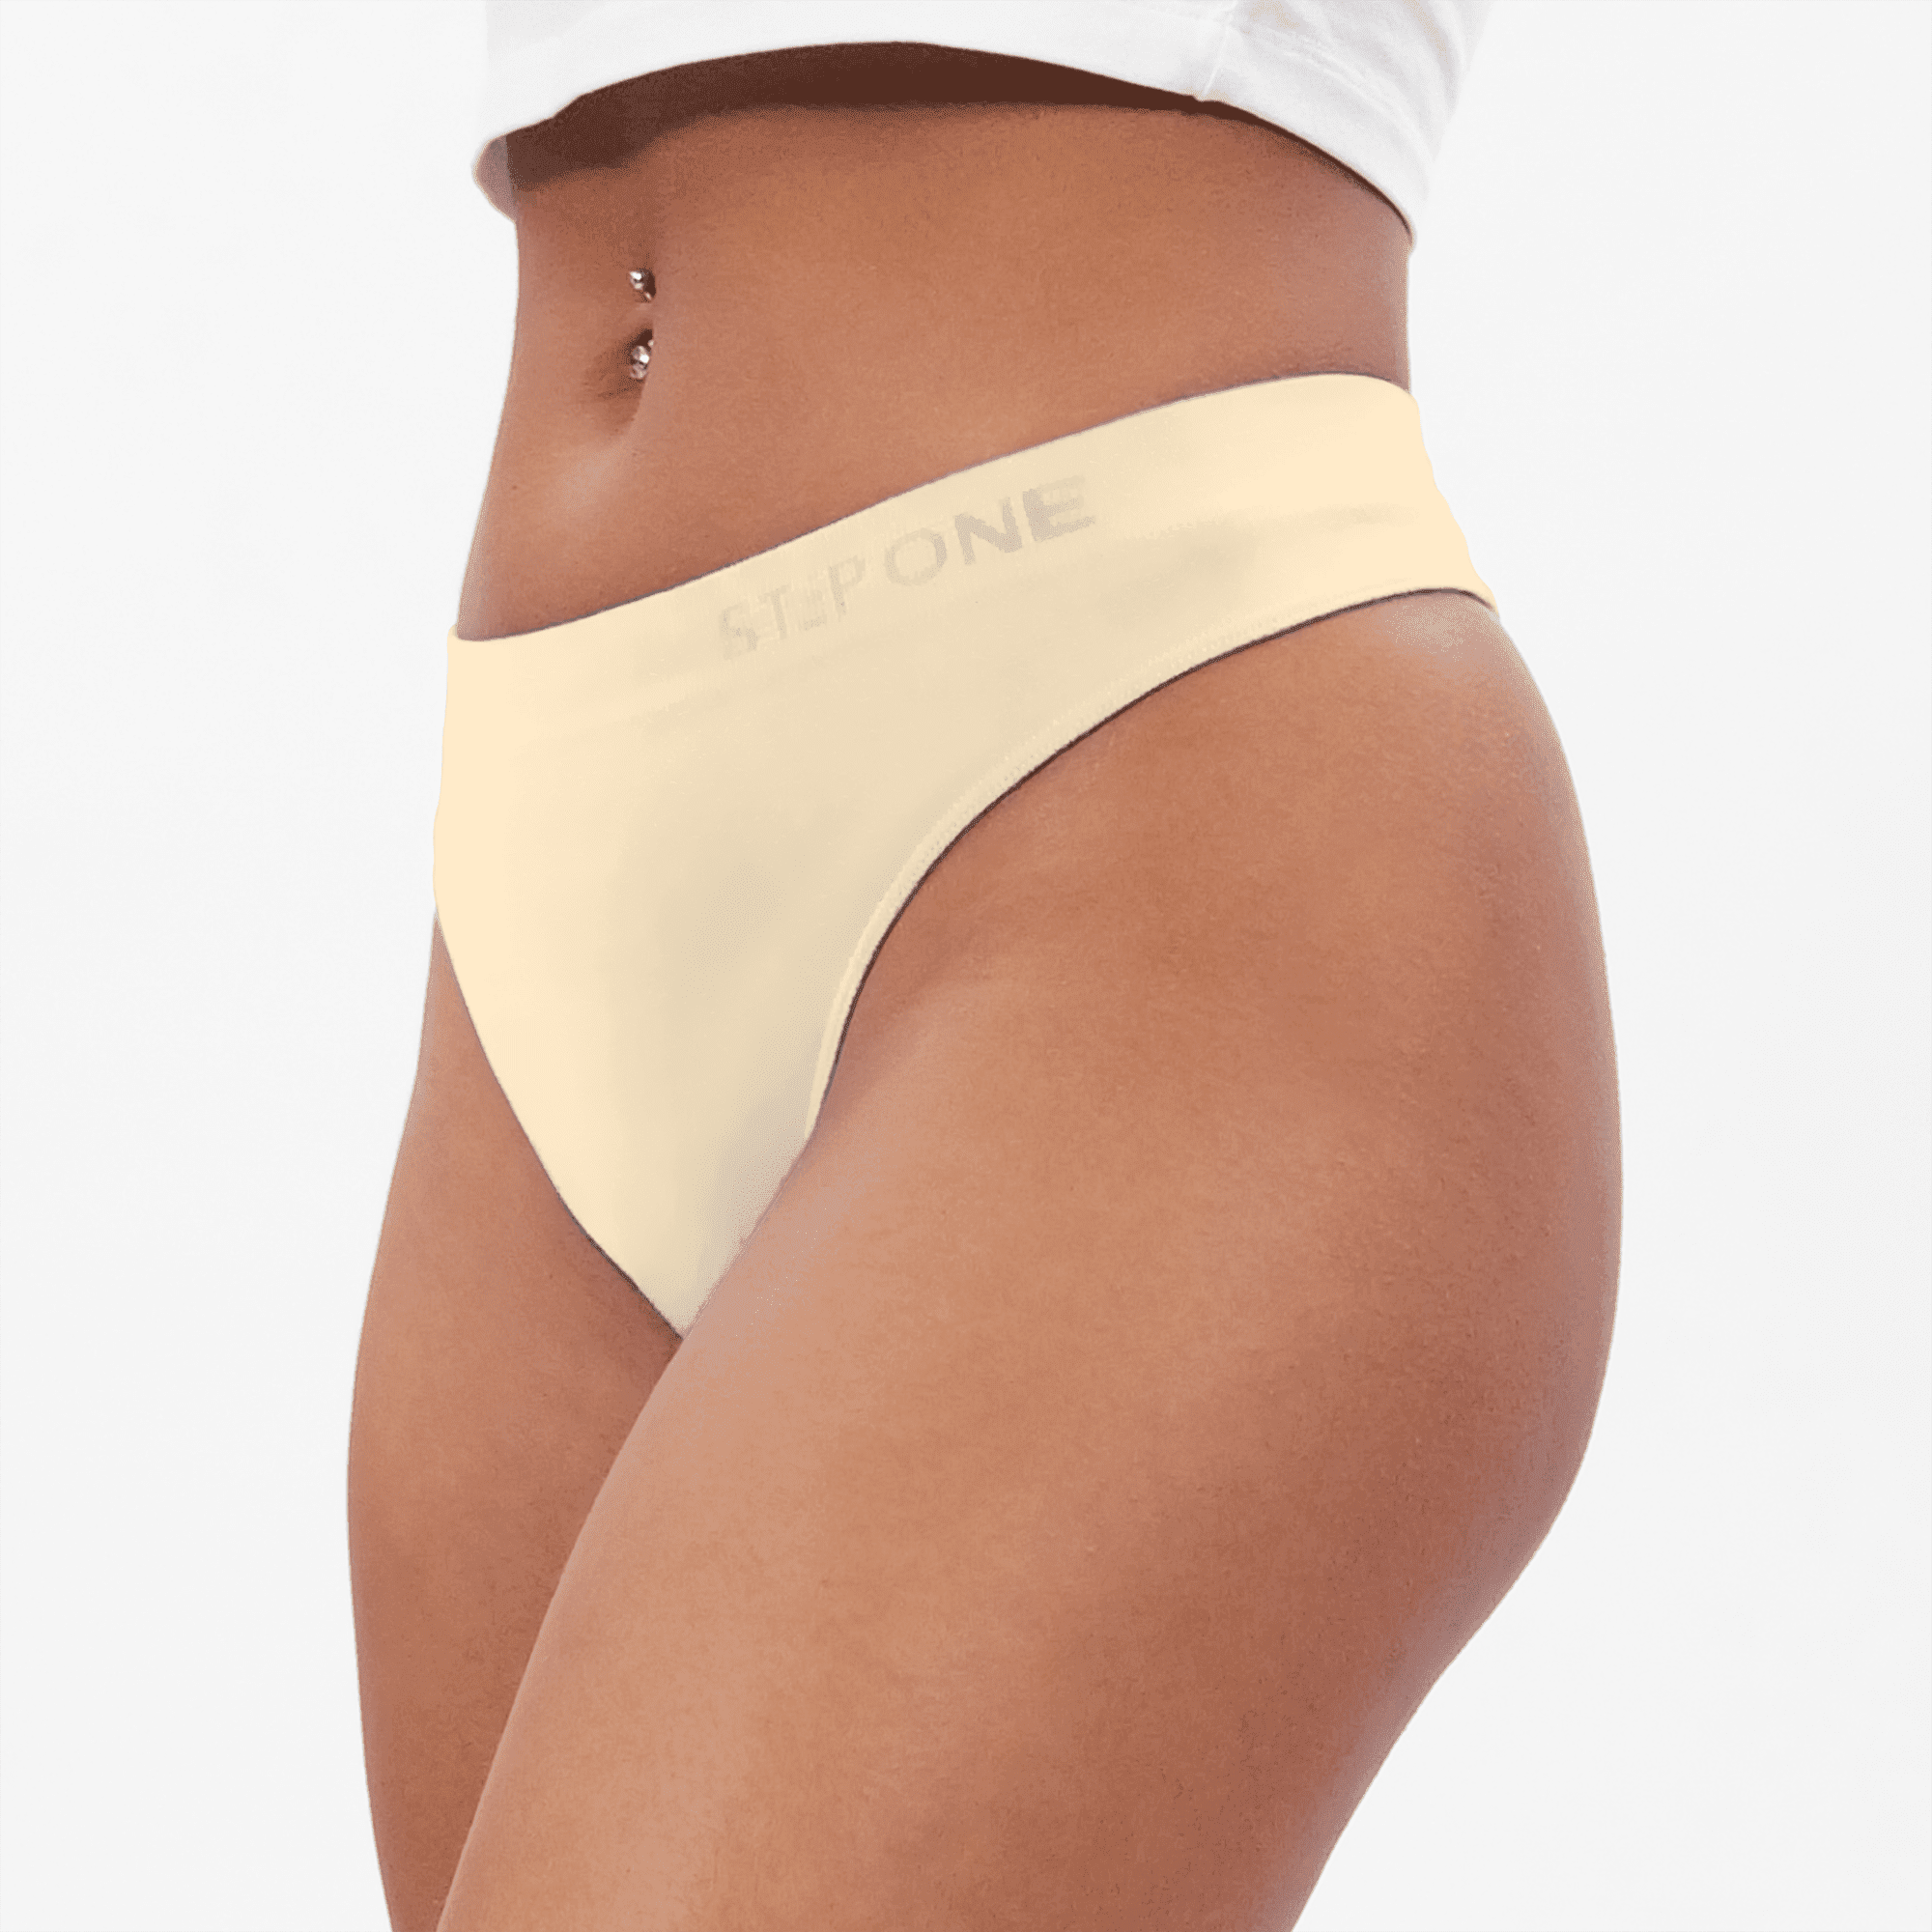 Women's SmoothFit Full Brief - Rose All Day - Model - #size_Large